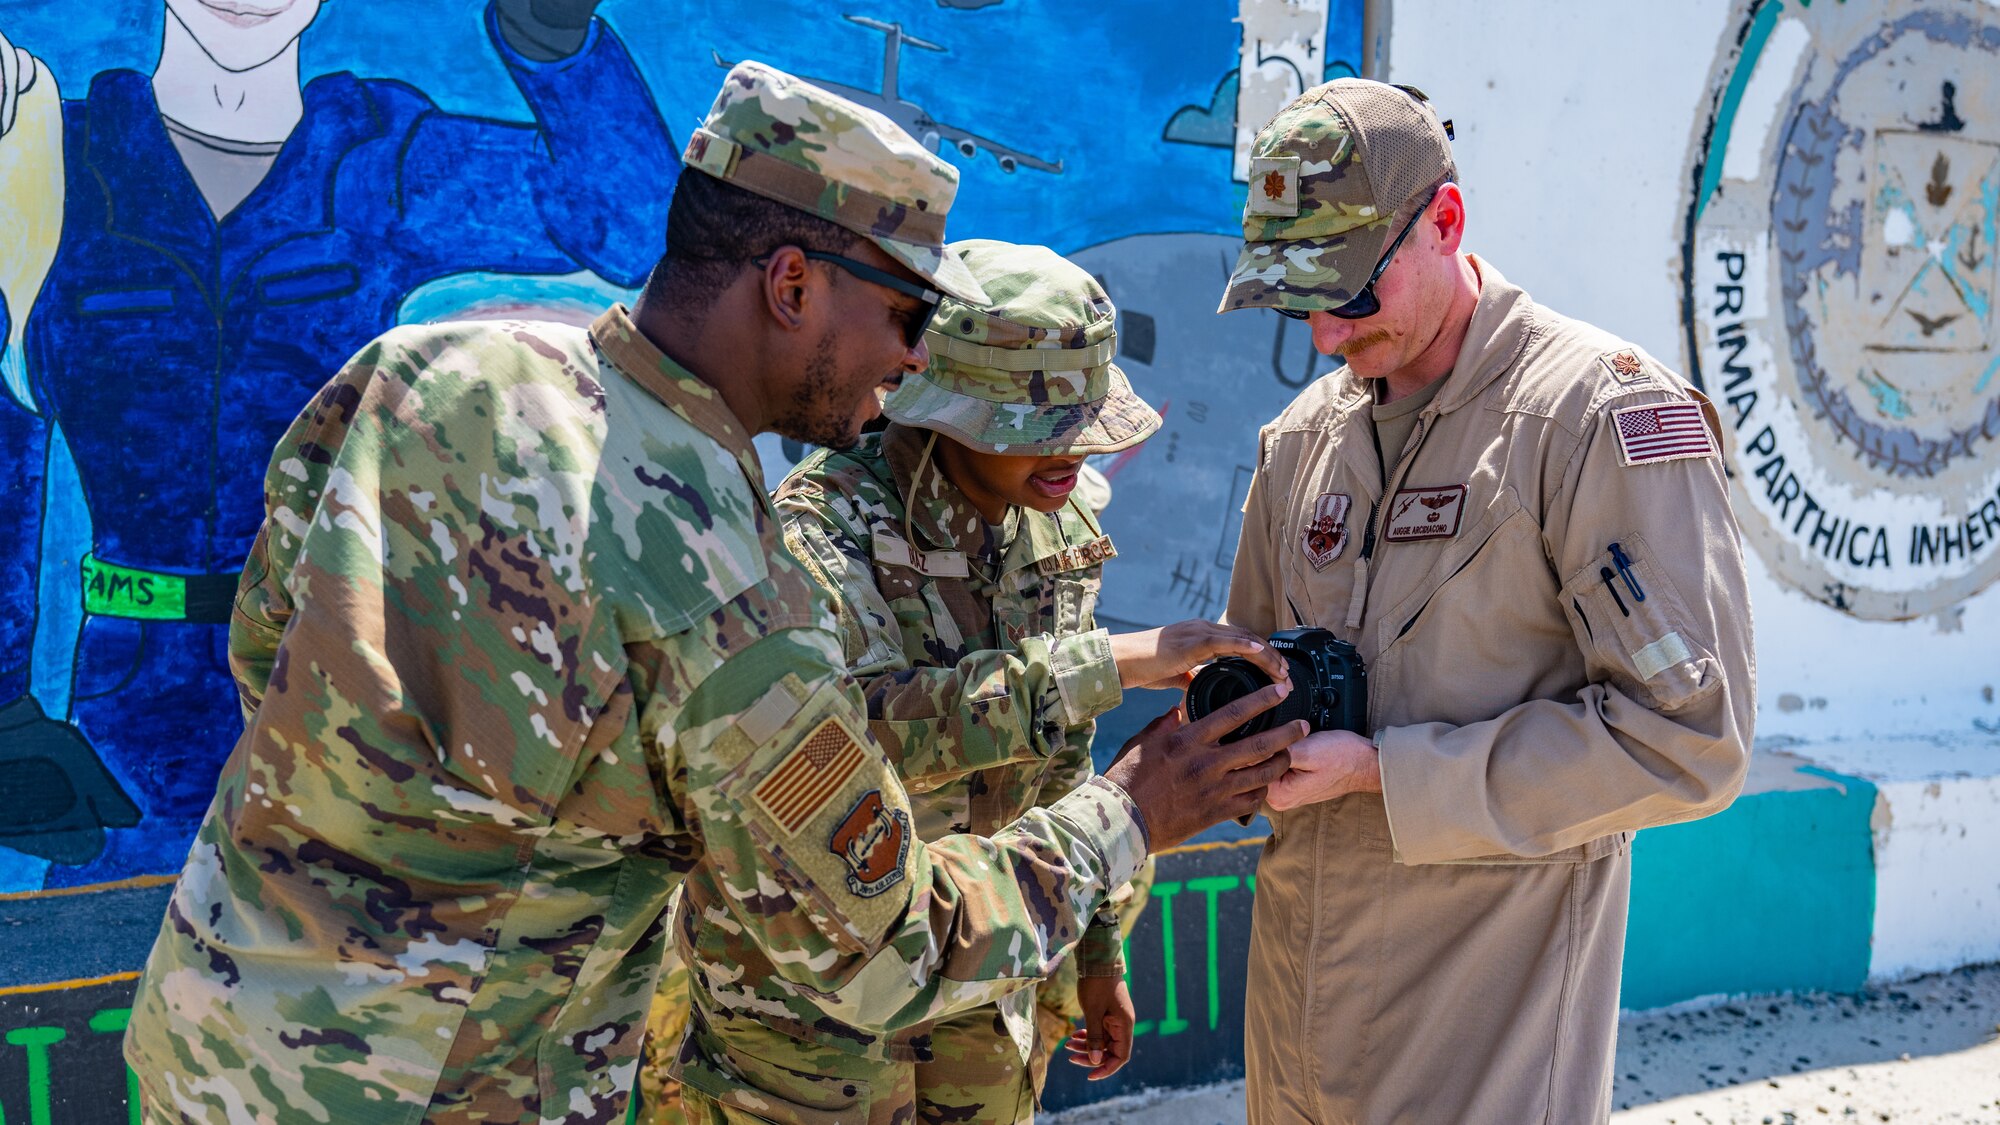 U.S. Air Force Tech. Sgt. Isaac Garden, 386th Air Expeditionary Wing NCOIC of command information (left), and Staff Sgt. Breanna Diaz, 386th AEW public affairs specialist (middle), teach camera operations to an Airman from the 386th AEW safety office during alert photography training at Ali Al Salem Air Base, Kuwait, June 21, 2023. The 386th AEW safety team attended the training to learn what goes into alert photography, and how it assists with a variety of scenarios and investigations.